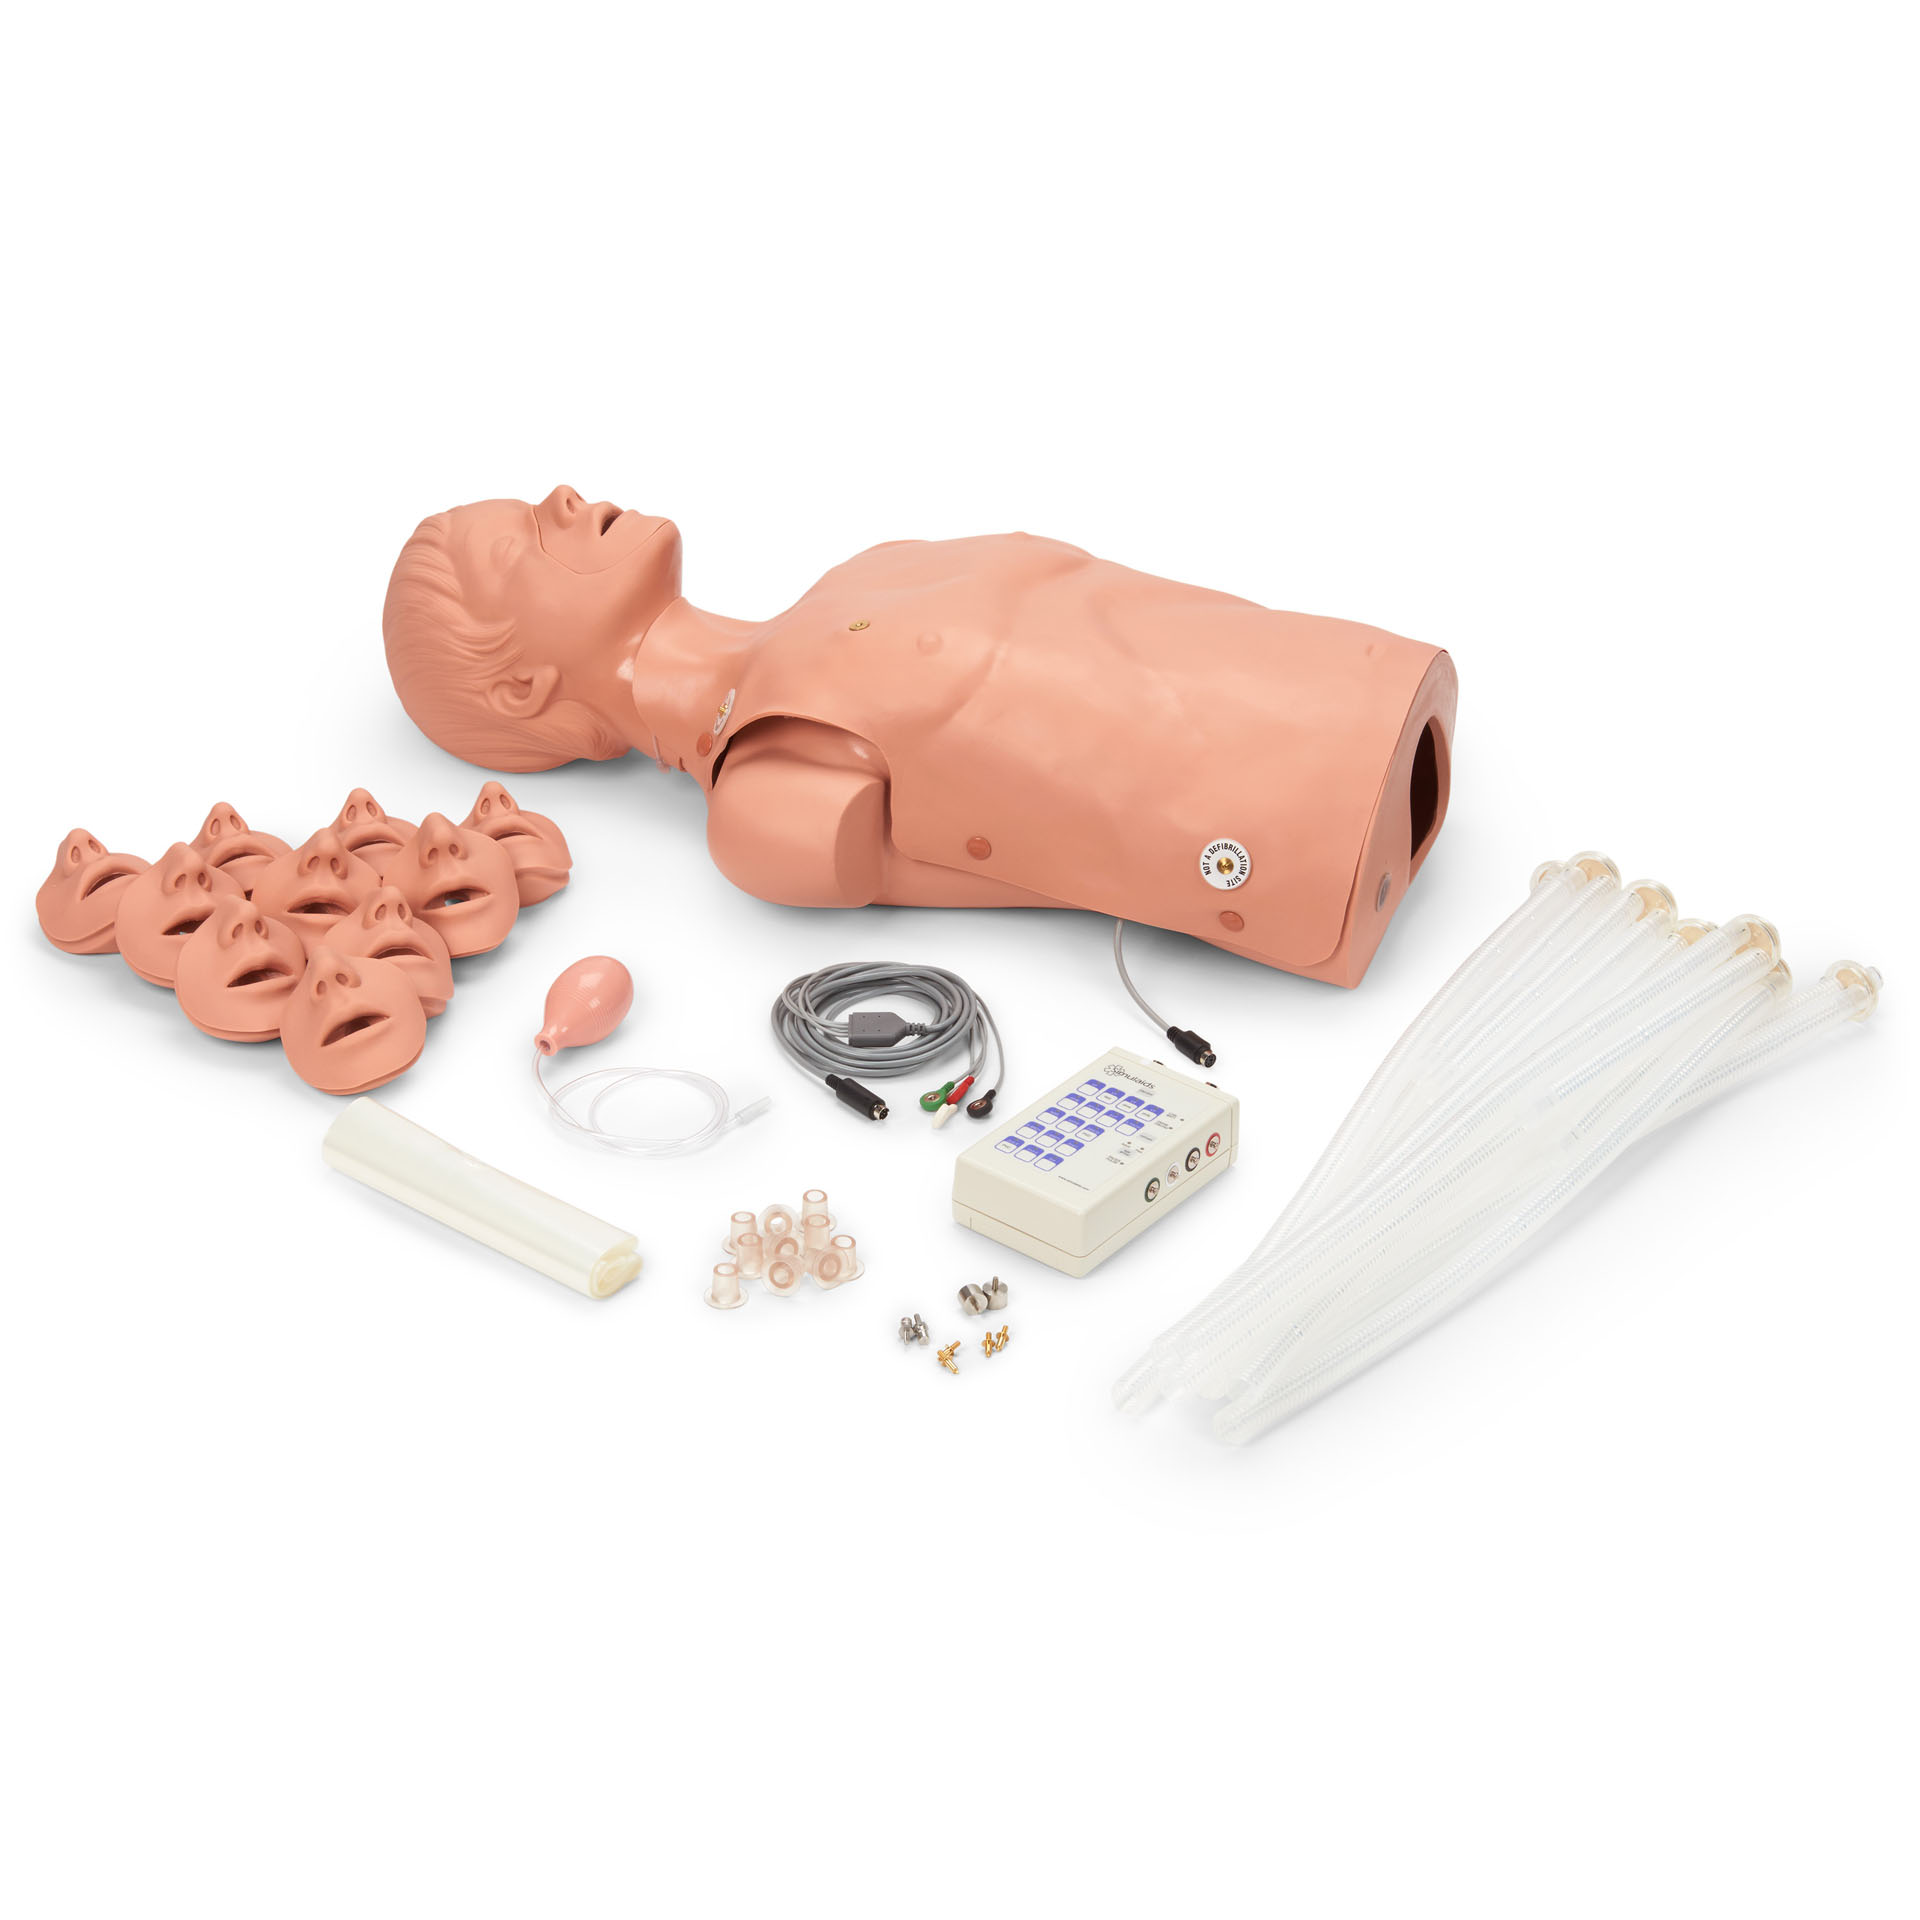 Defibrillation CPR Training Manikin With Carrying Bag